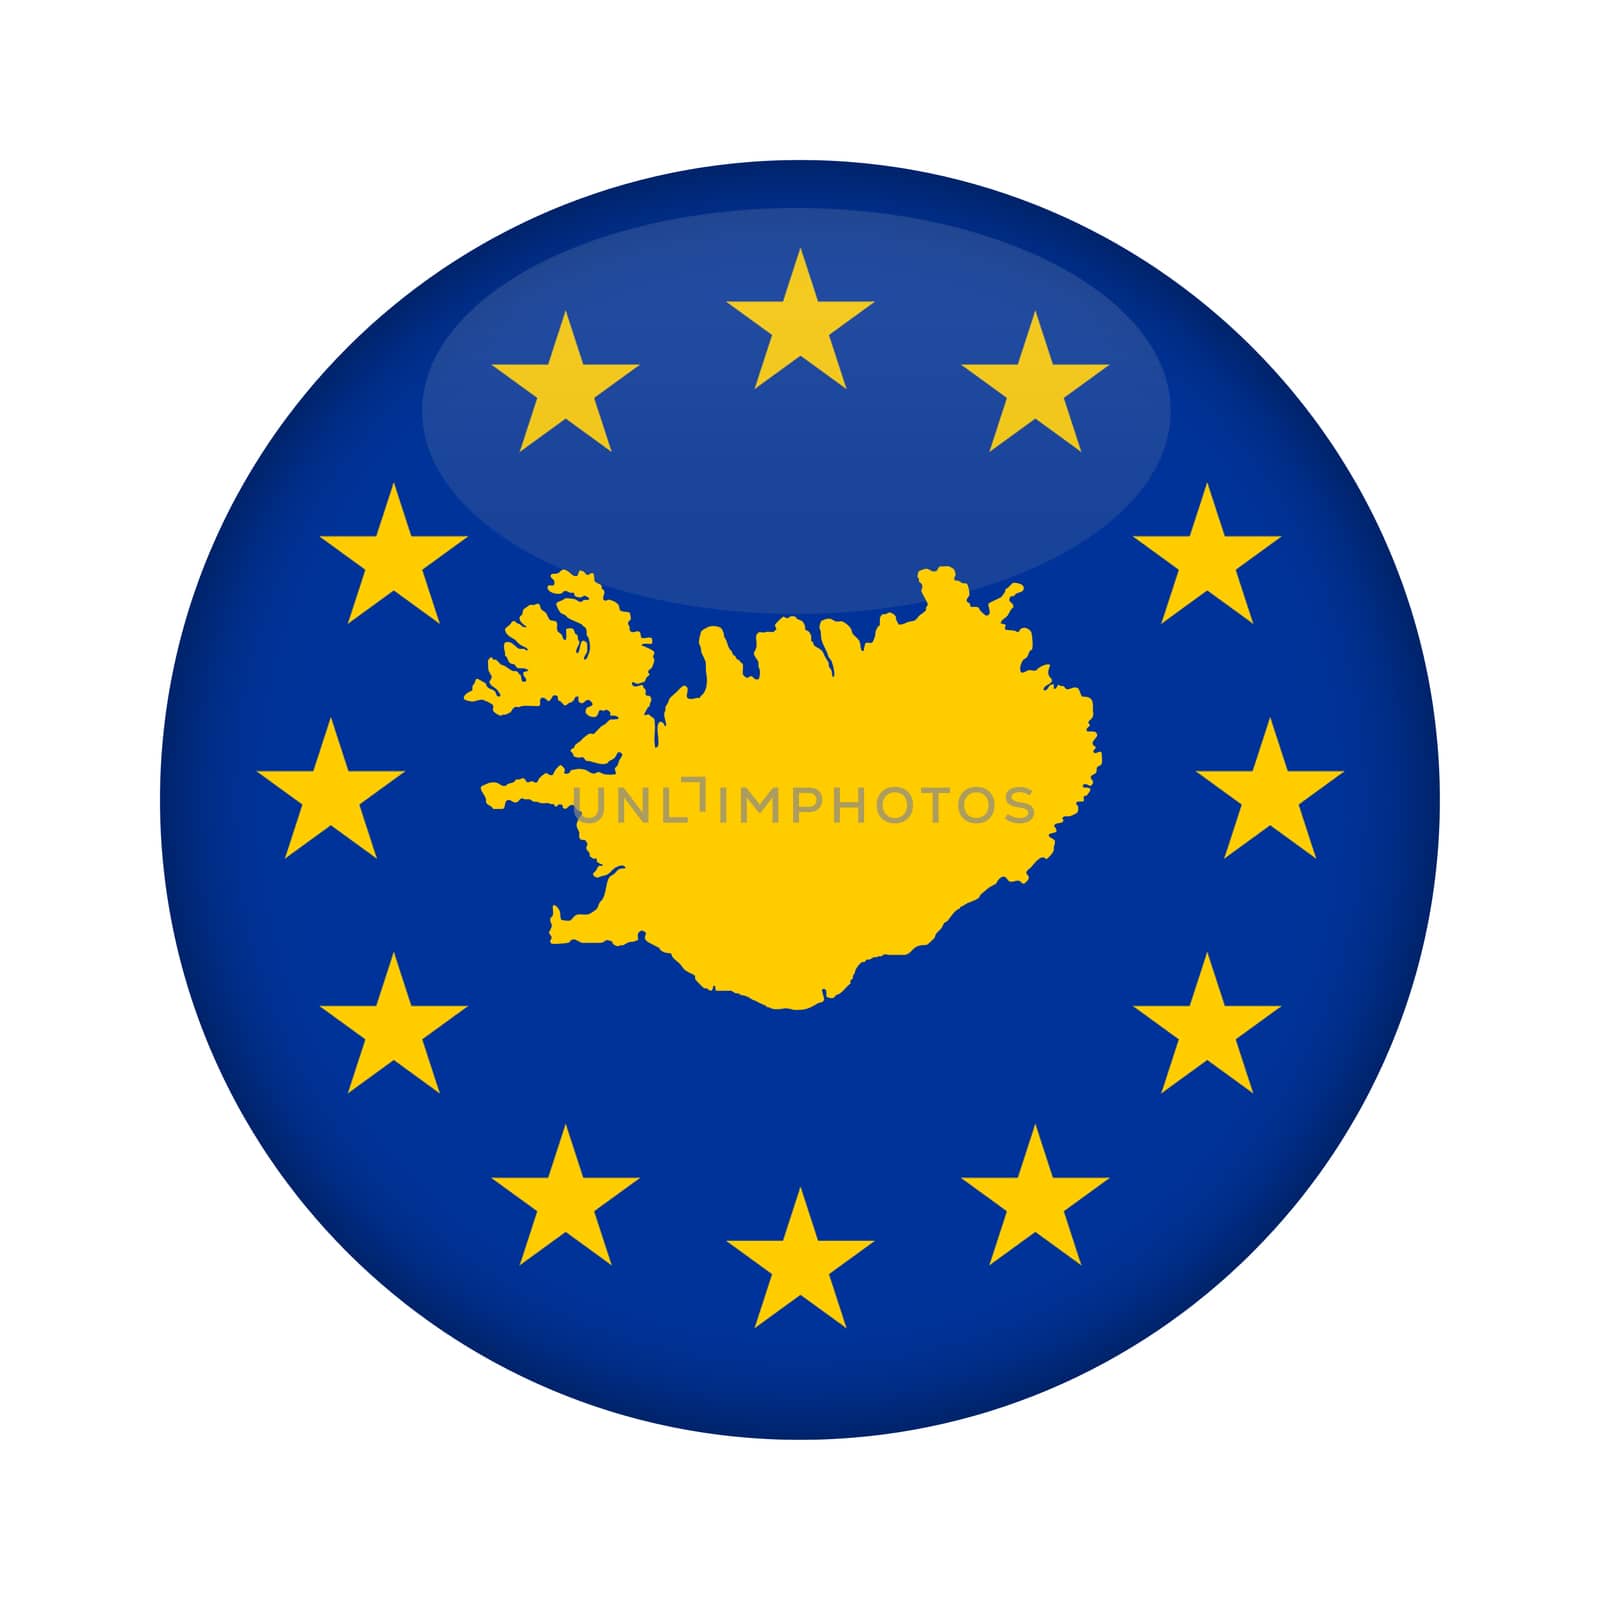 Iceland map on a European Union flag button isolated on a white background.